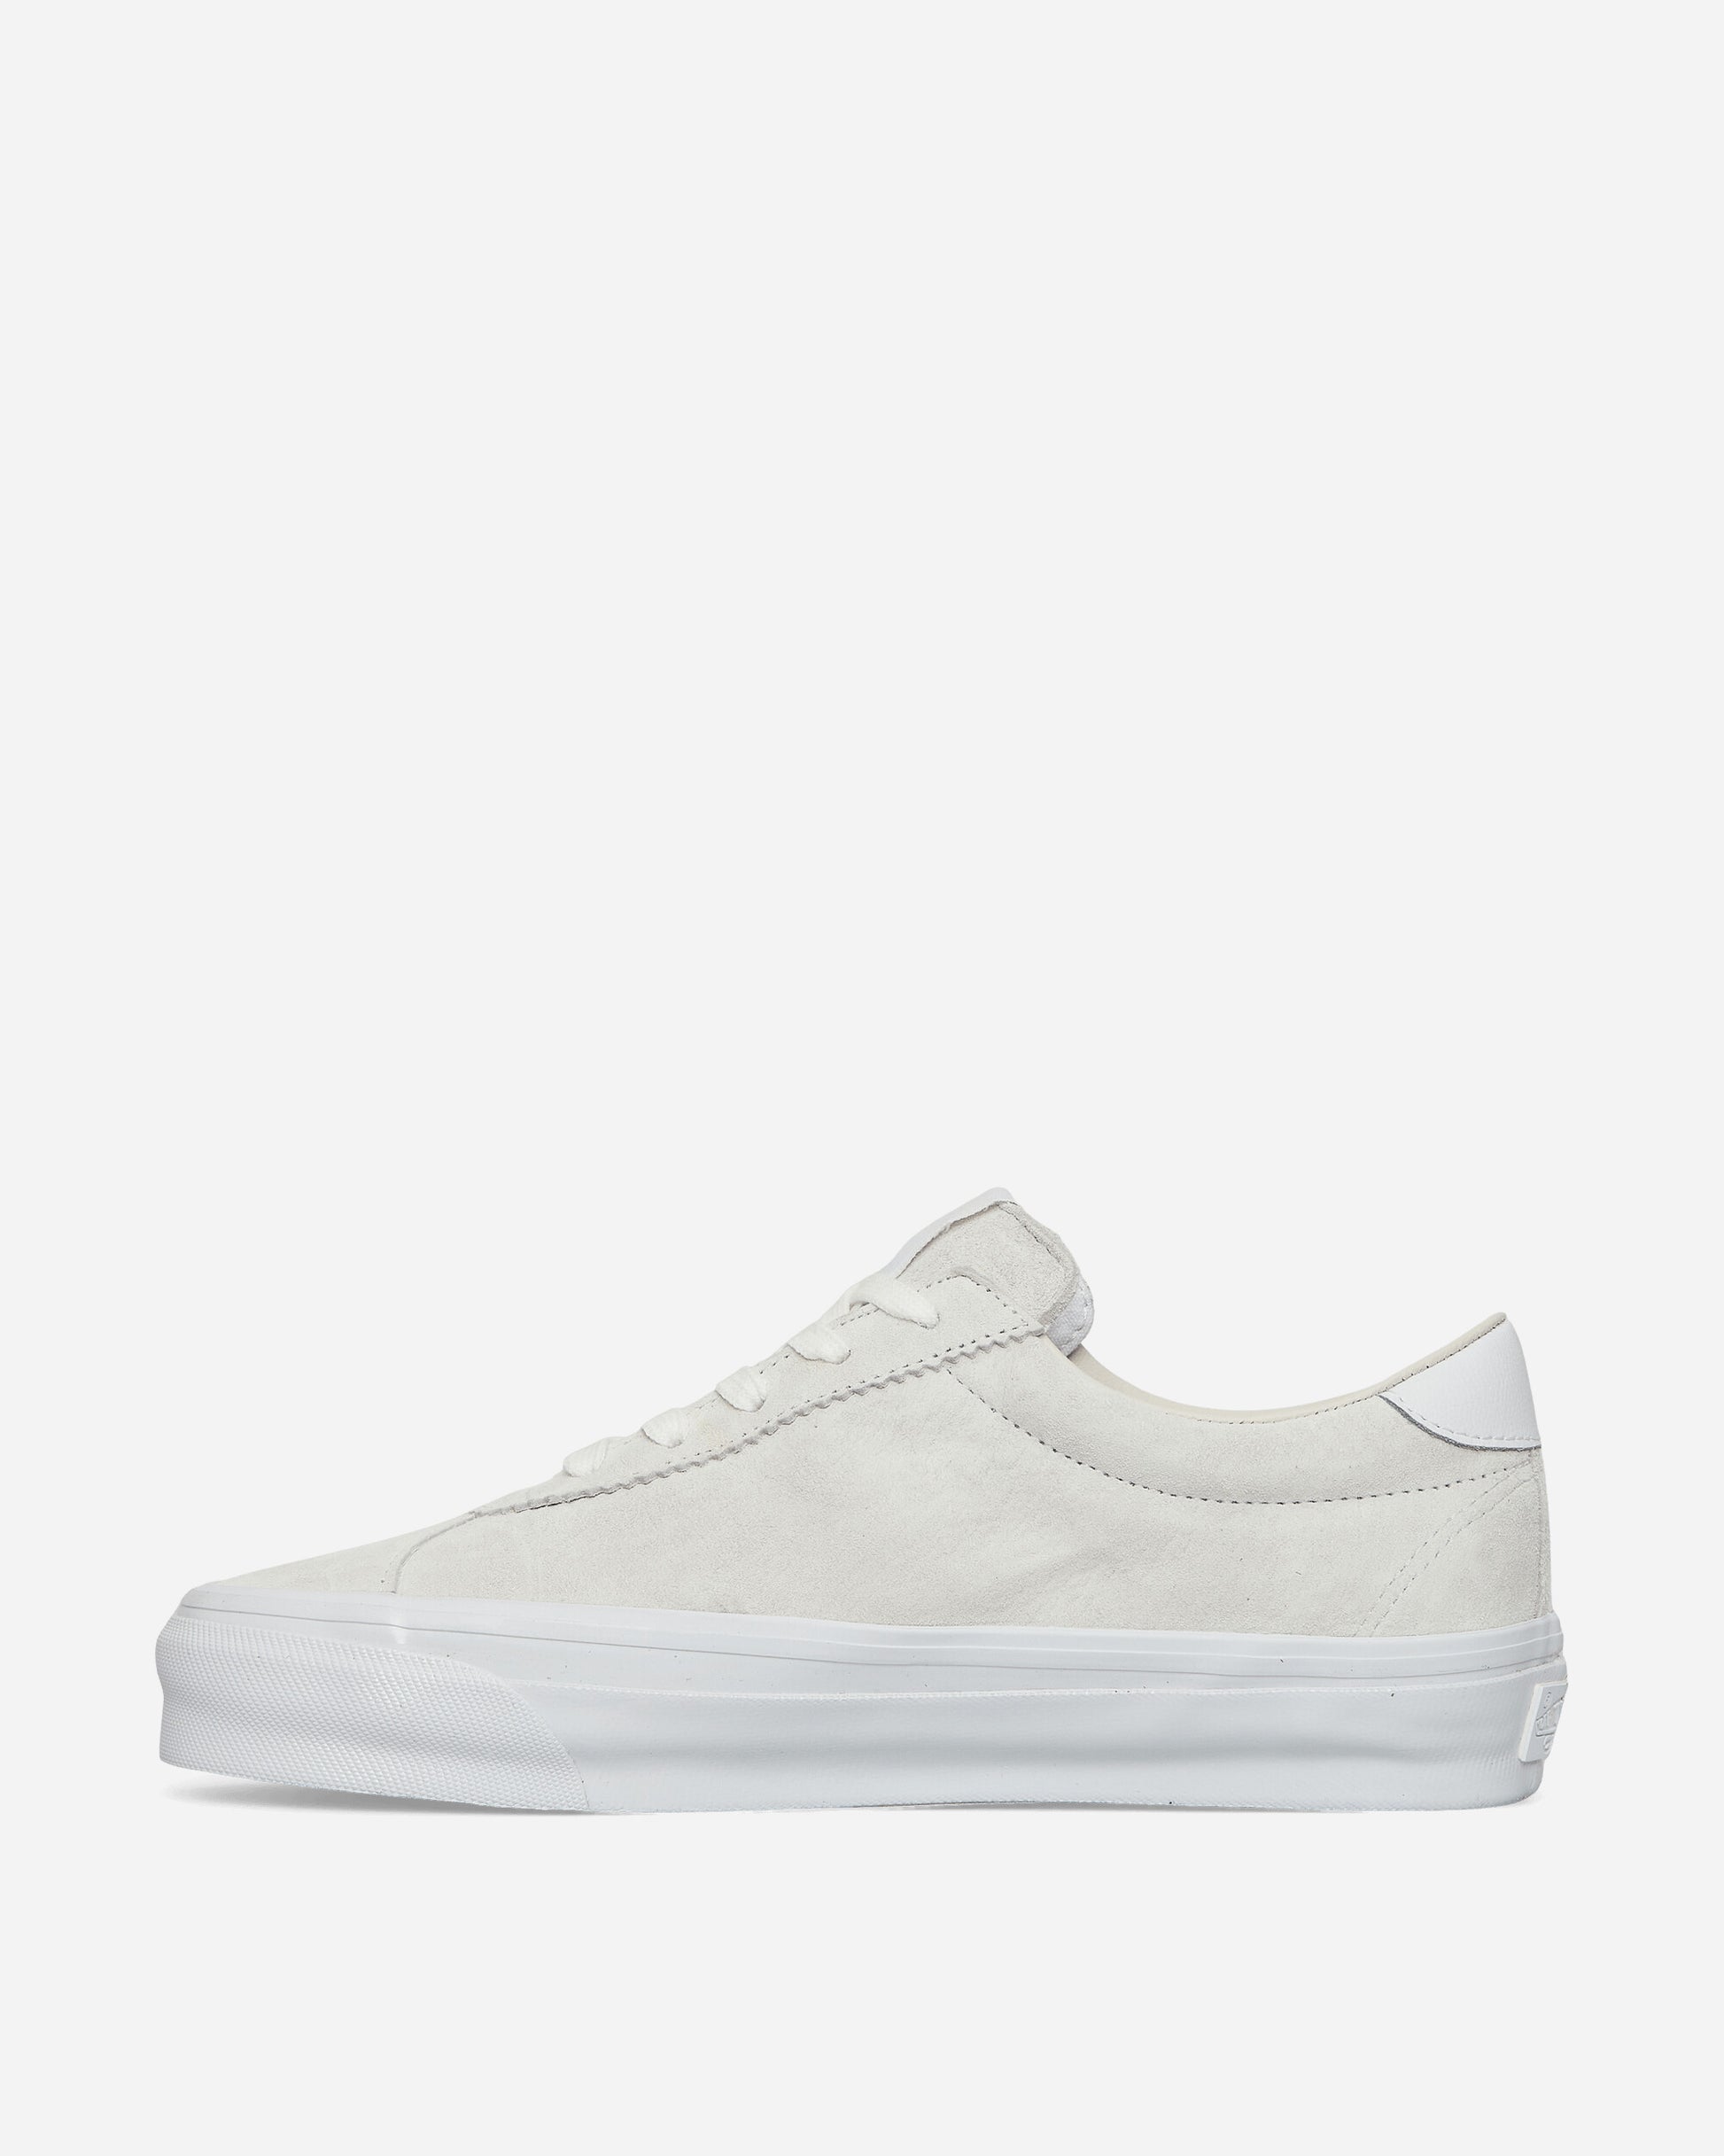 Vans Sport 73 Pig Suede White/White Sneakers Low VN000CR1WWW1